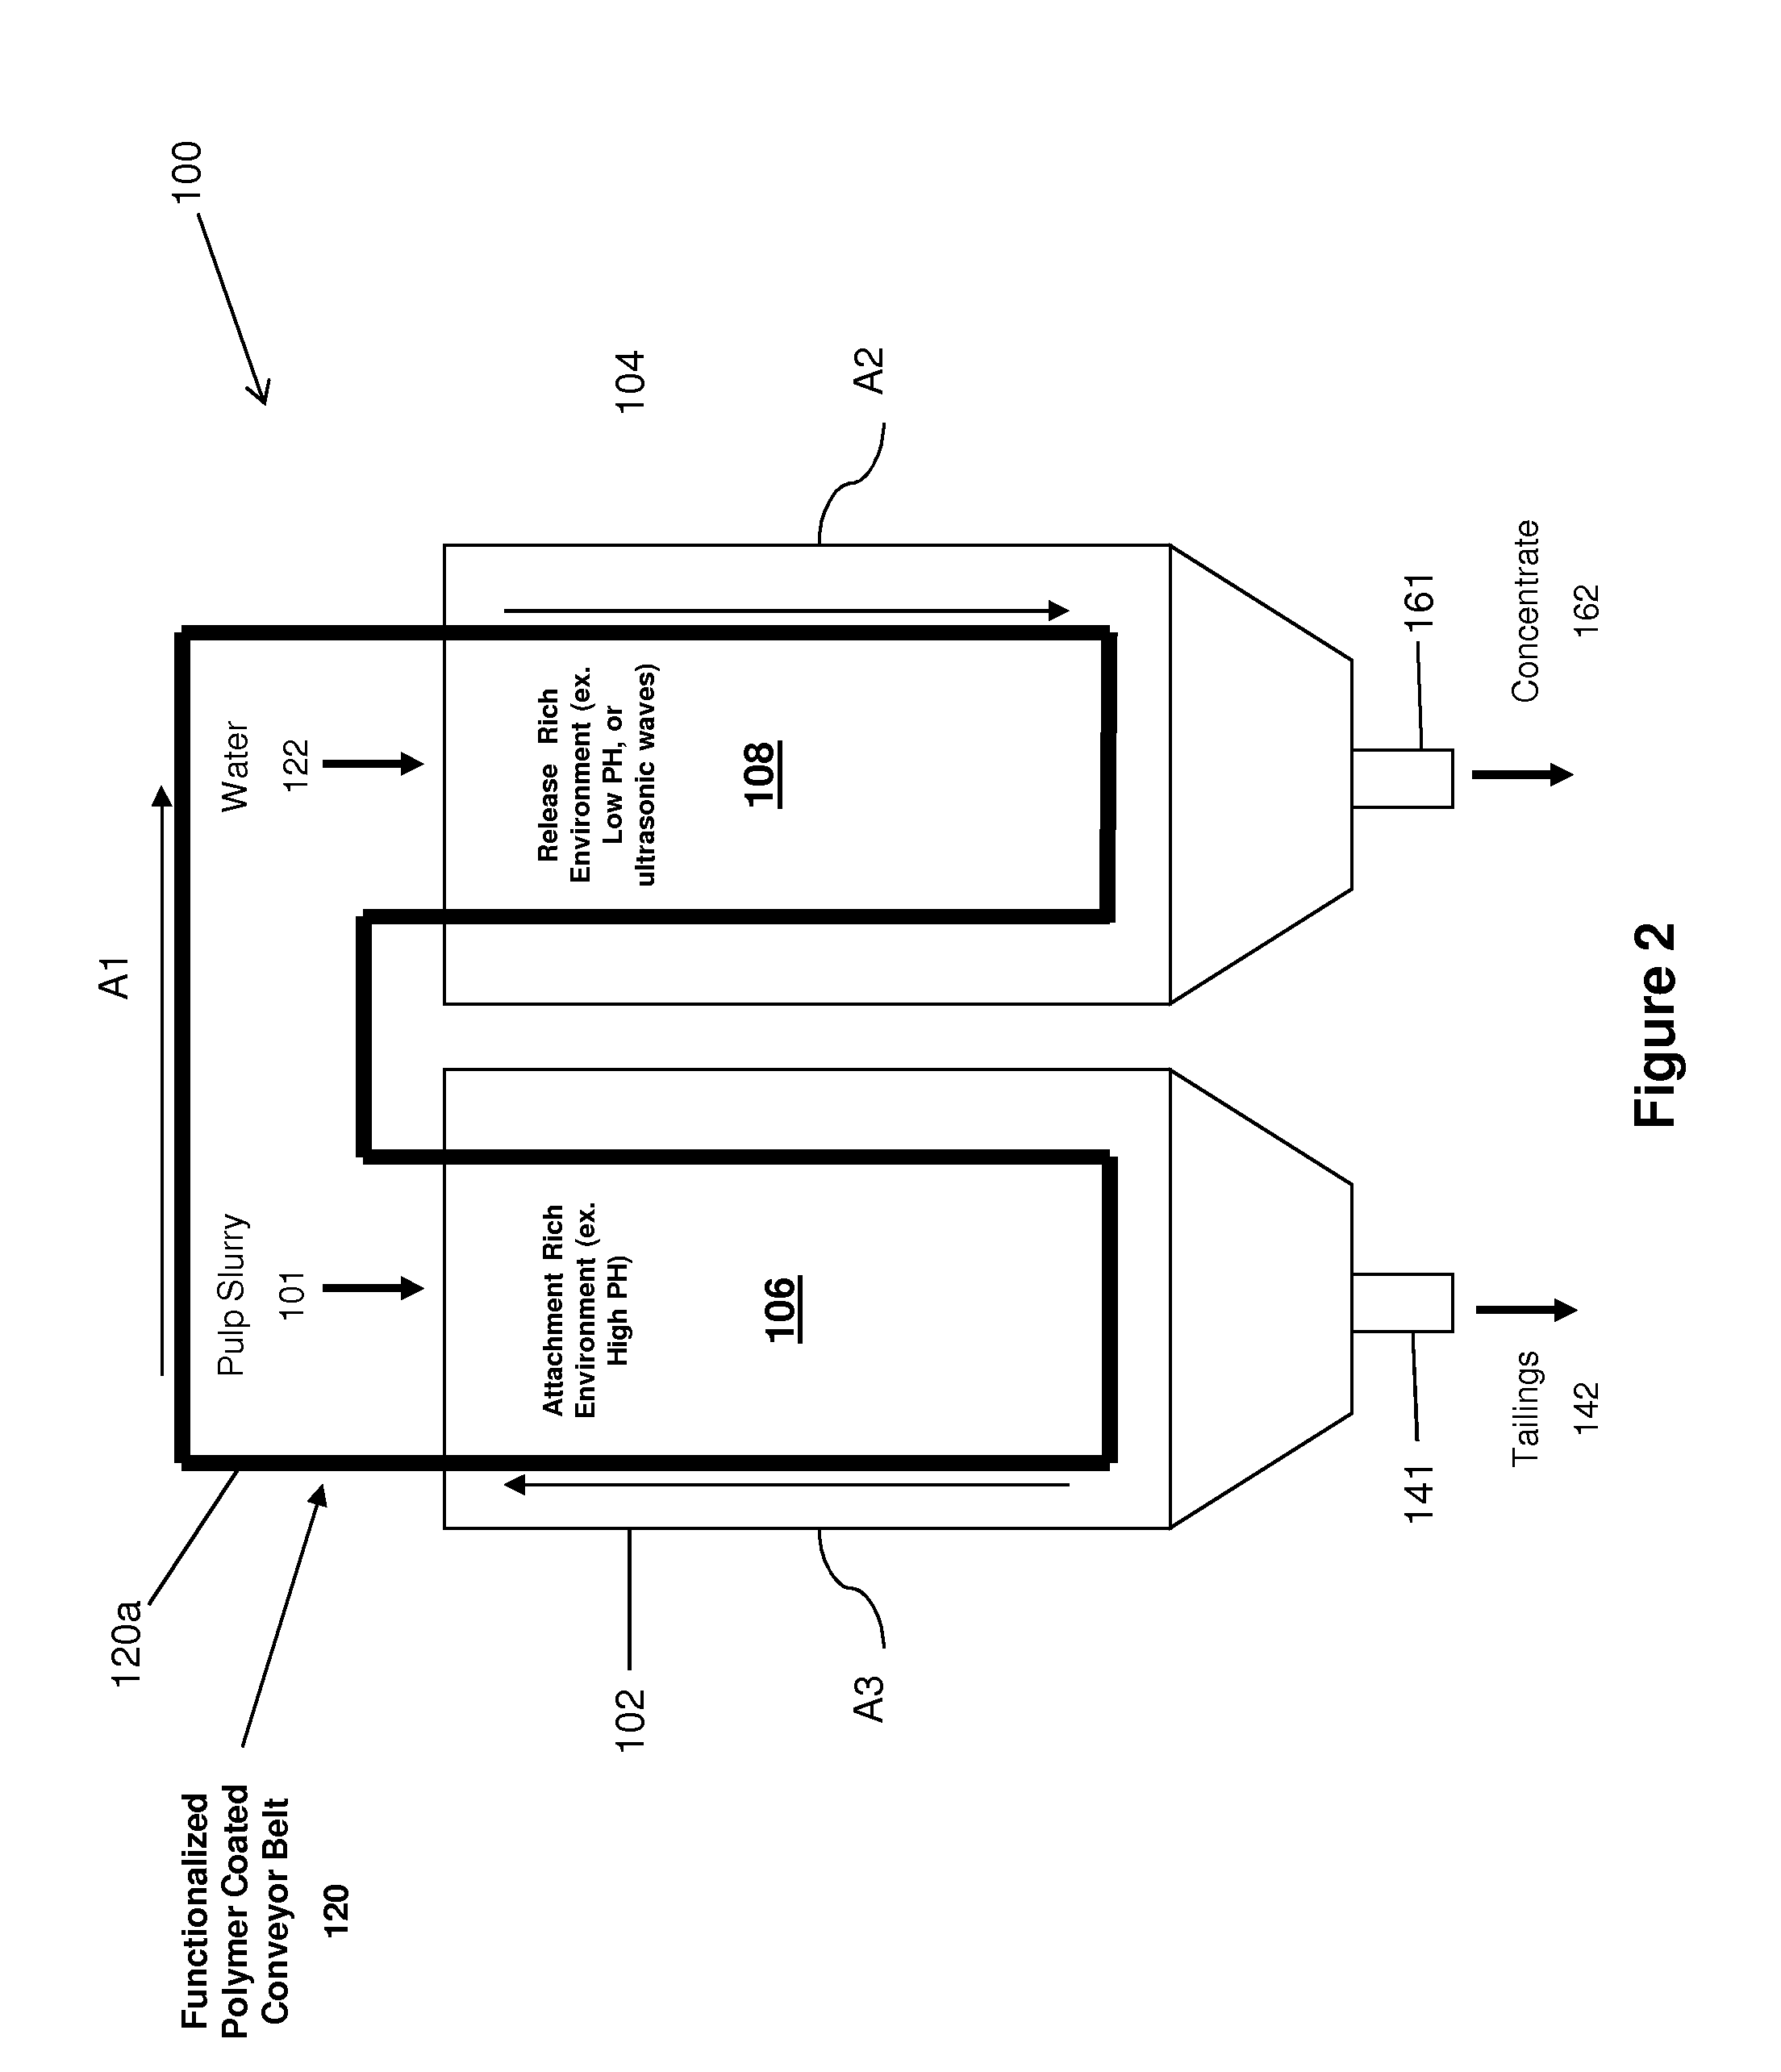 Mineral separation using functionalized membranes